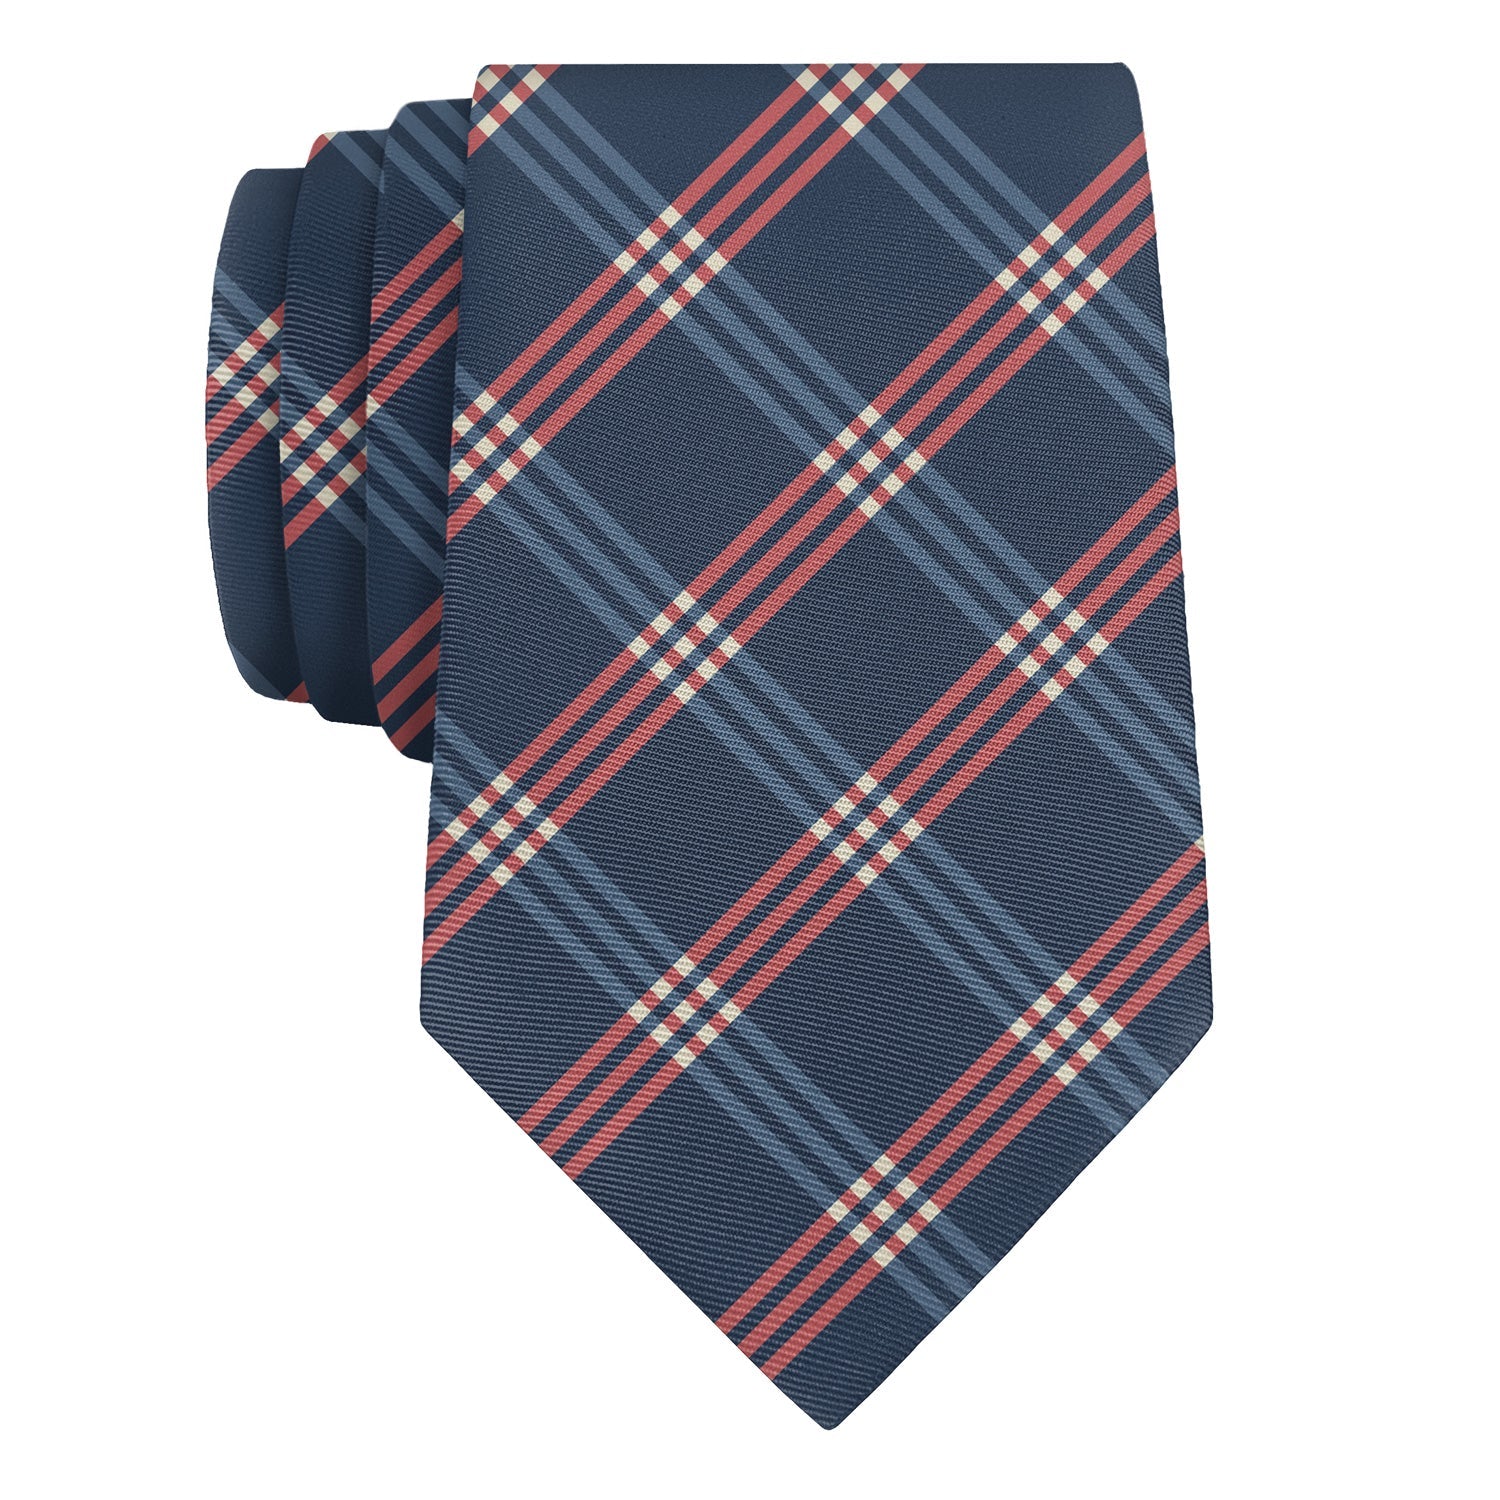 Intersector Plaid Necktie - Rolled - Knotty Tie Co.